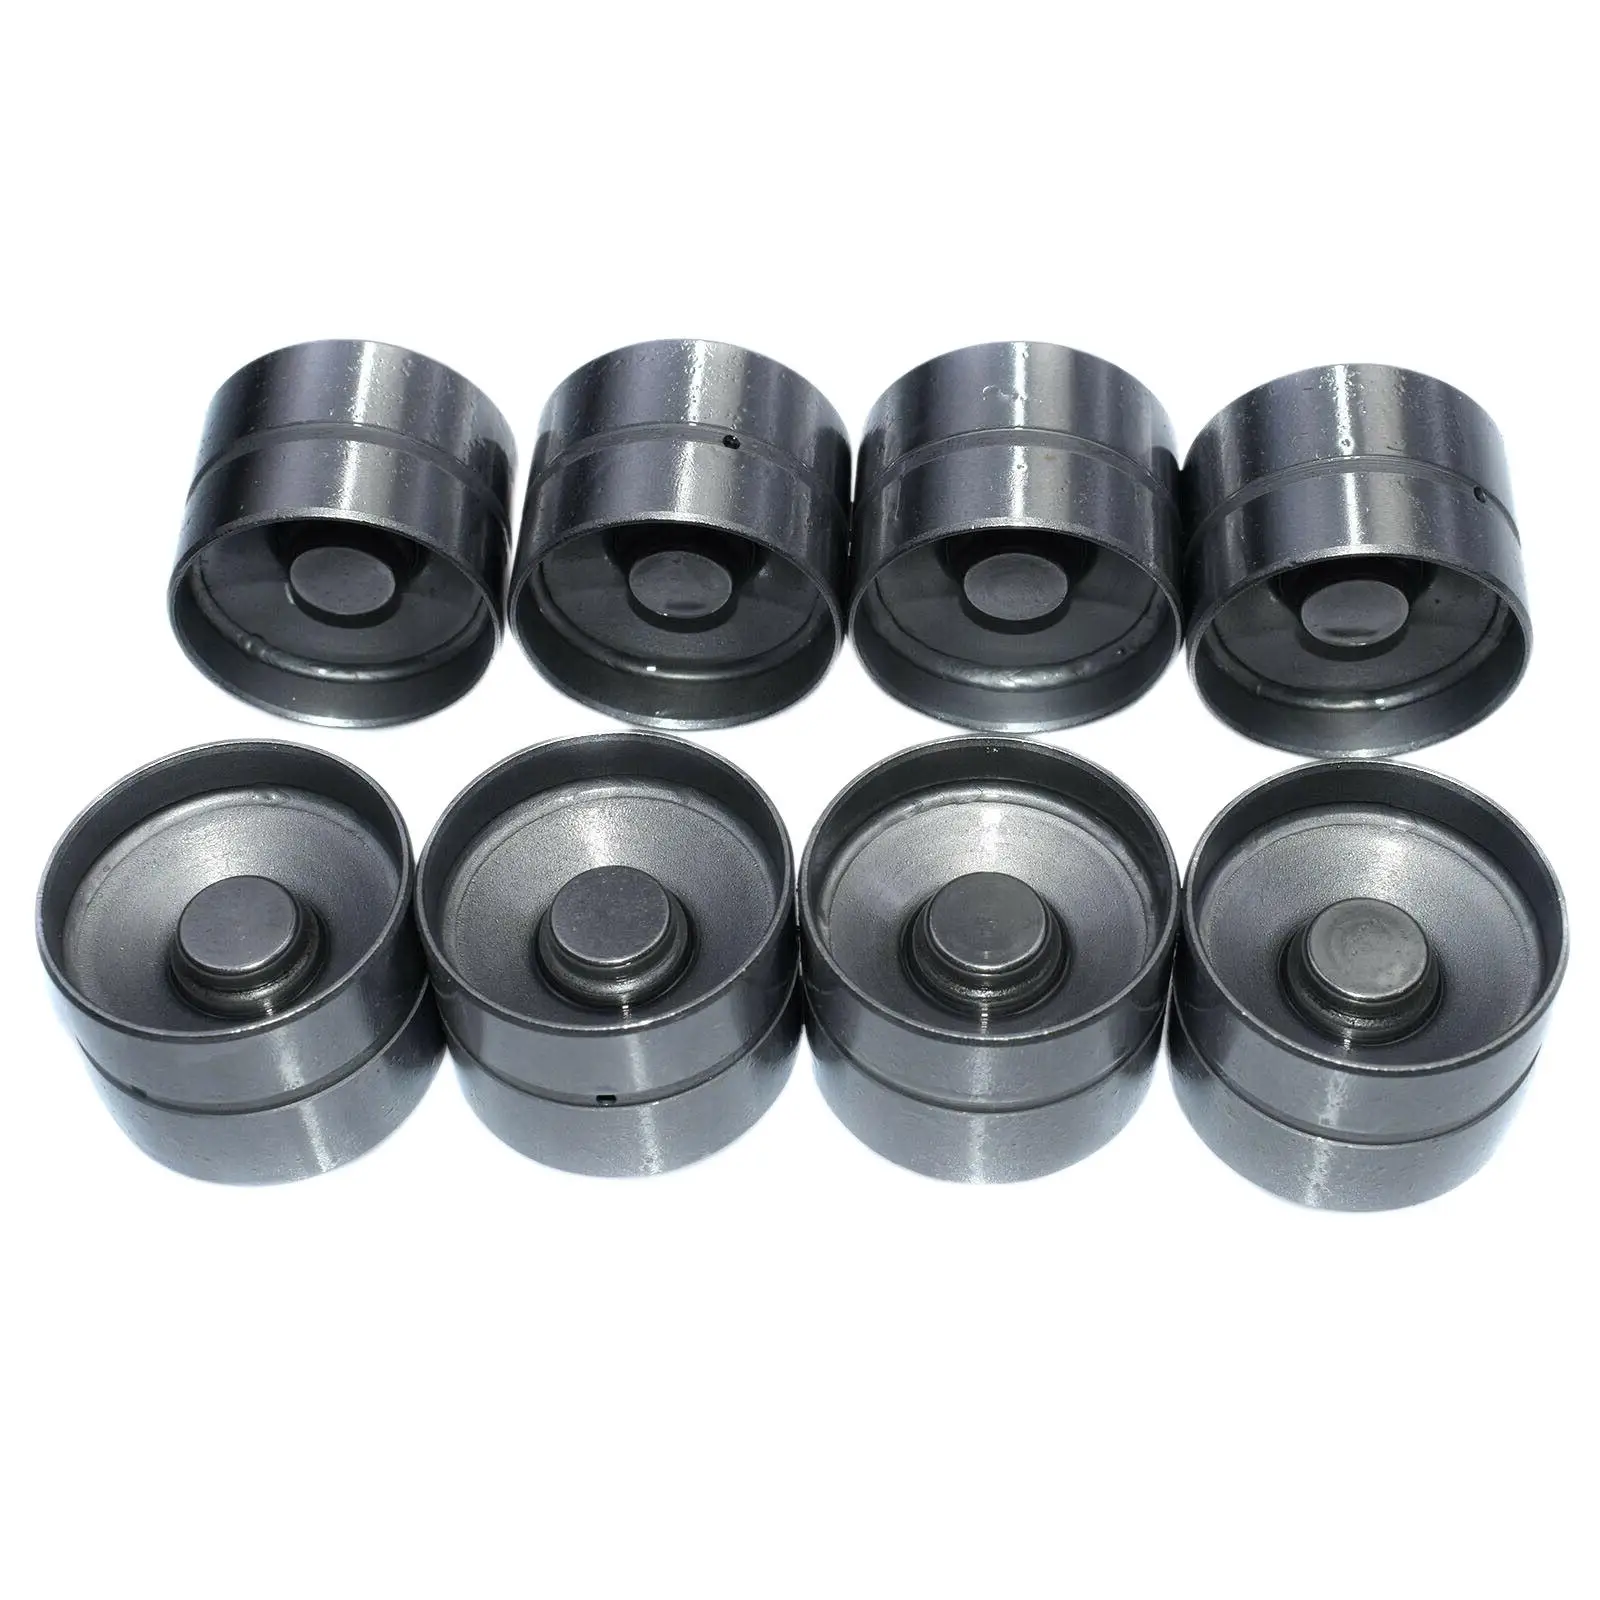 8-Pack Hydraulic Lifter Tappets Follower Tappet Push Rod Kit for VW Golf 050109309M